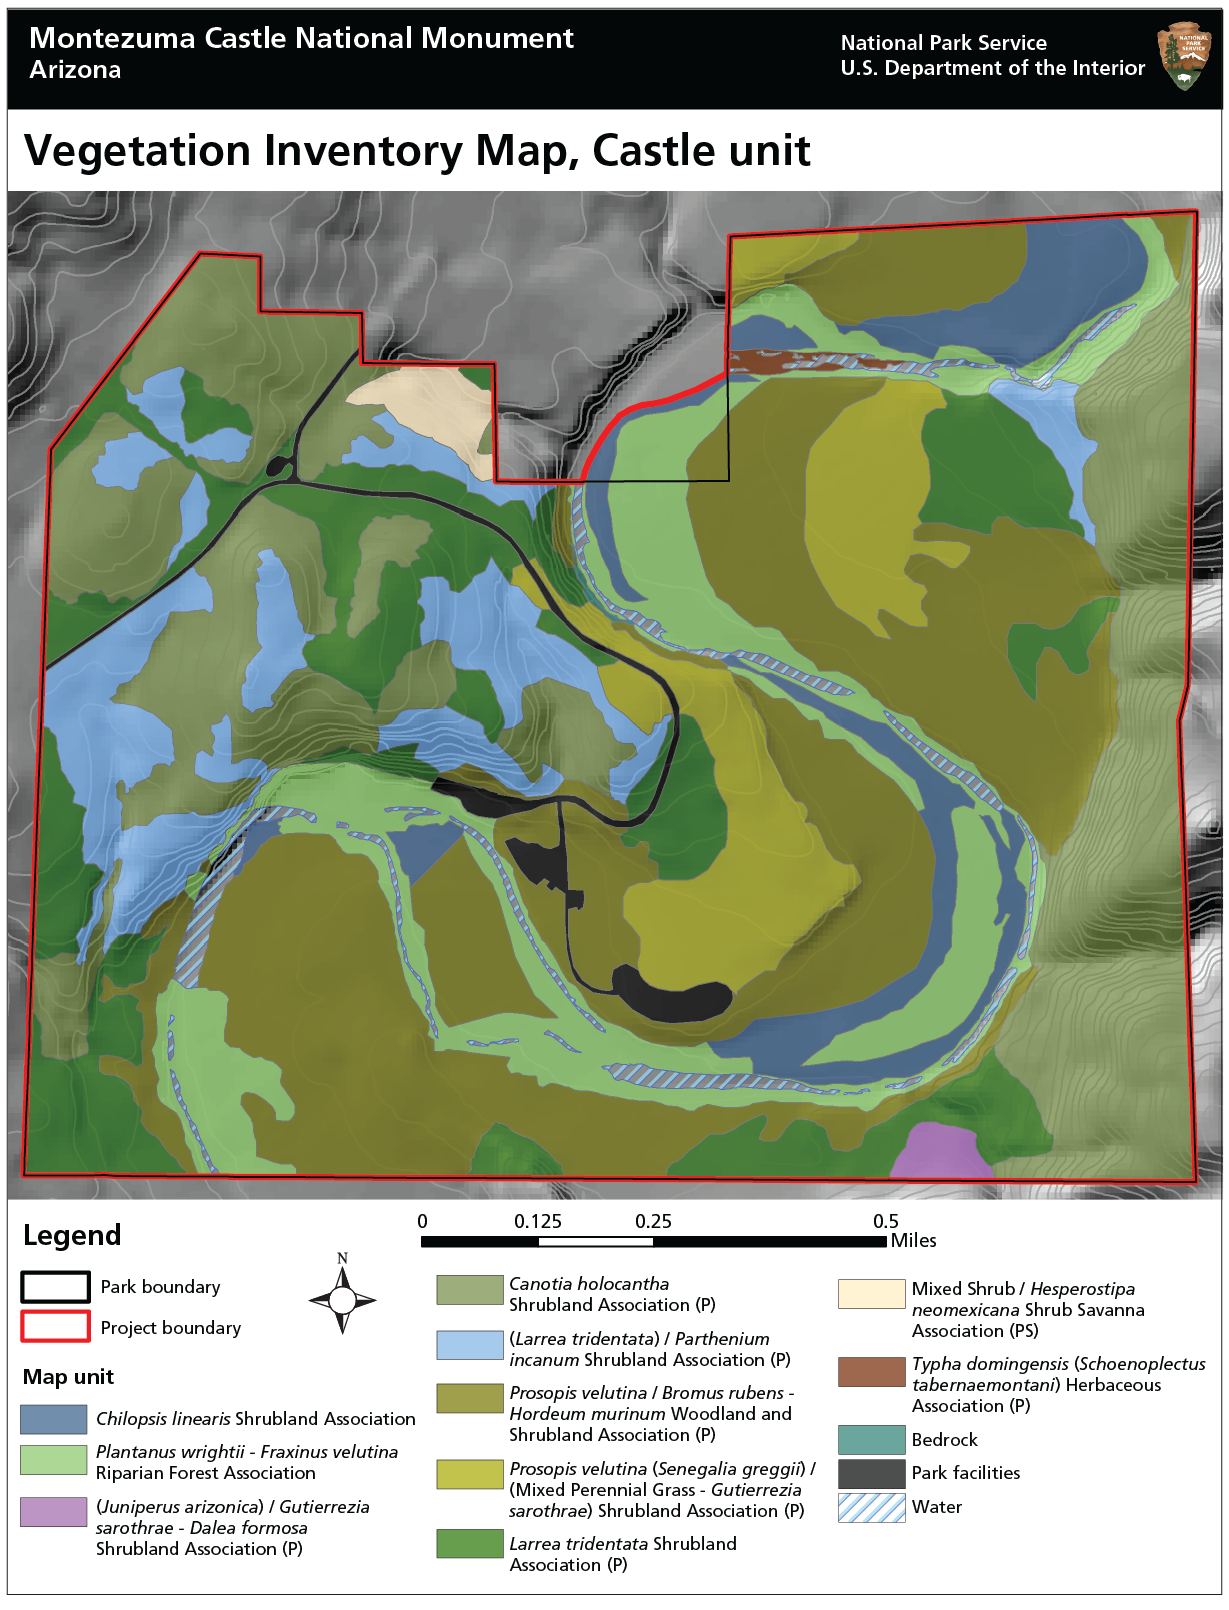 Map of Montezuma Castle National Monument (Castle unit) with multiple color fields indicating the location of different vegetation types